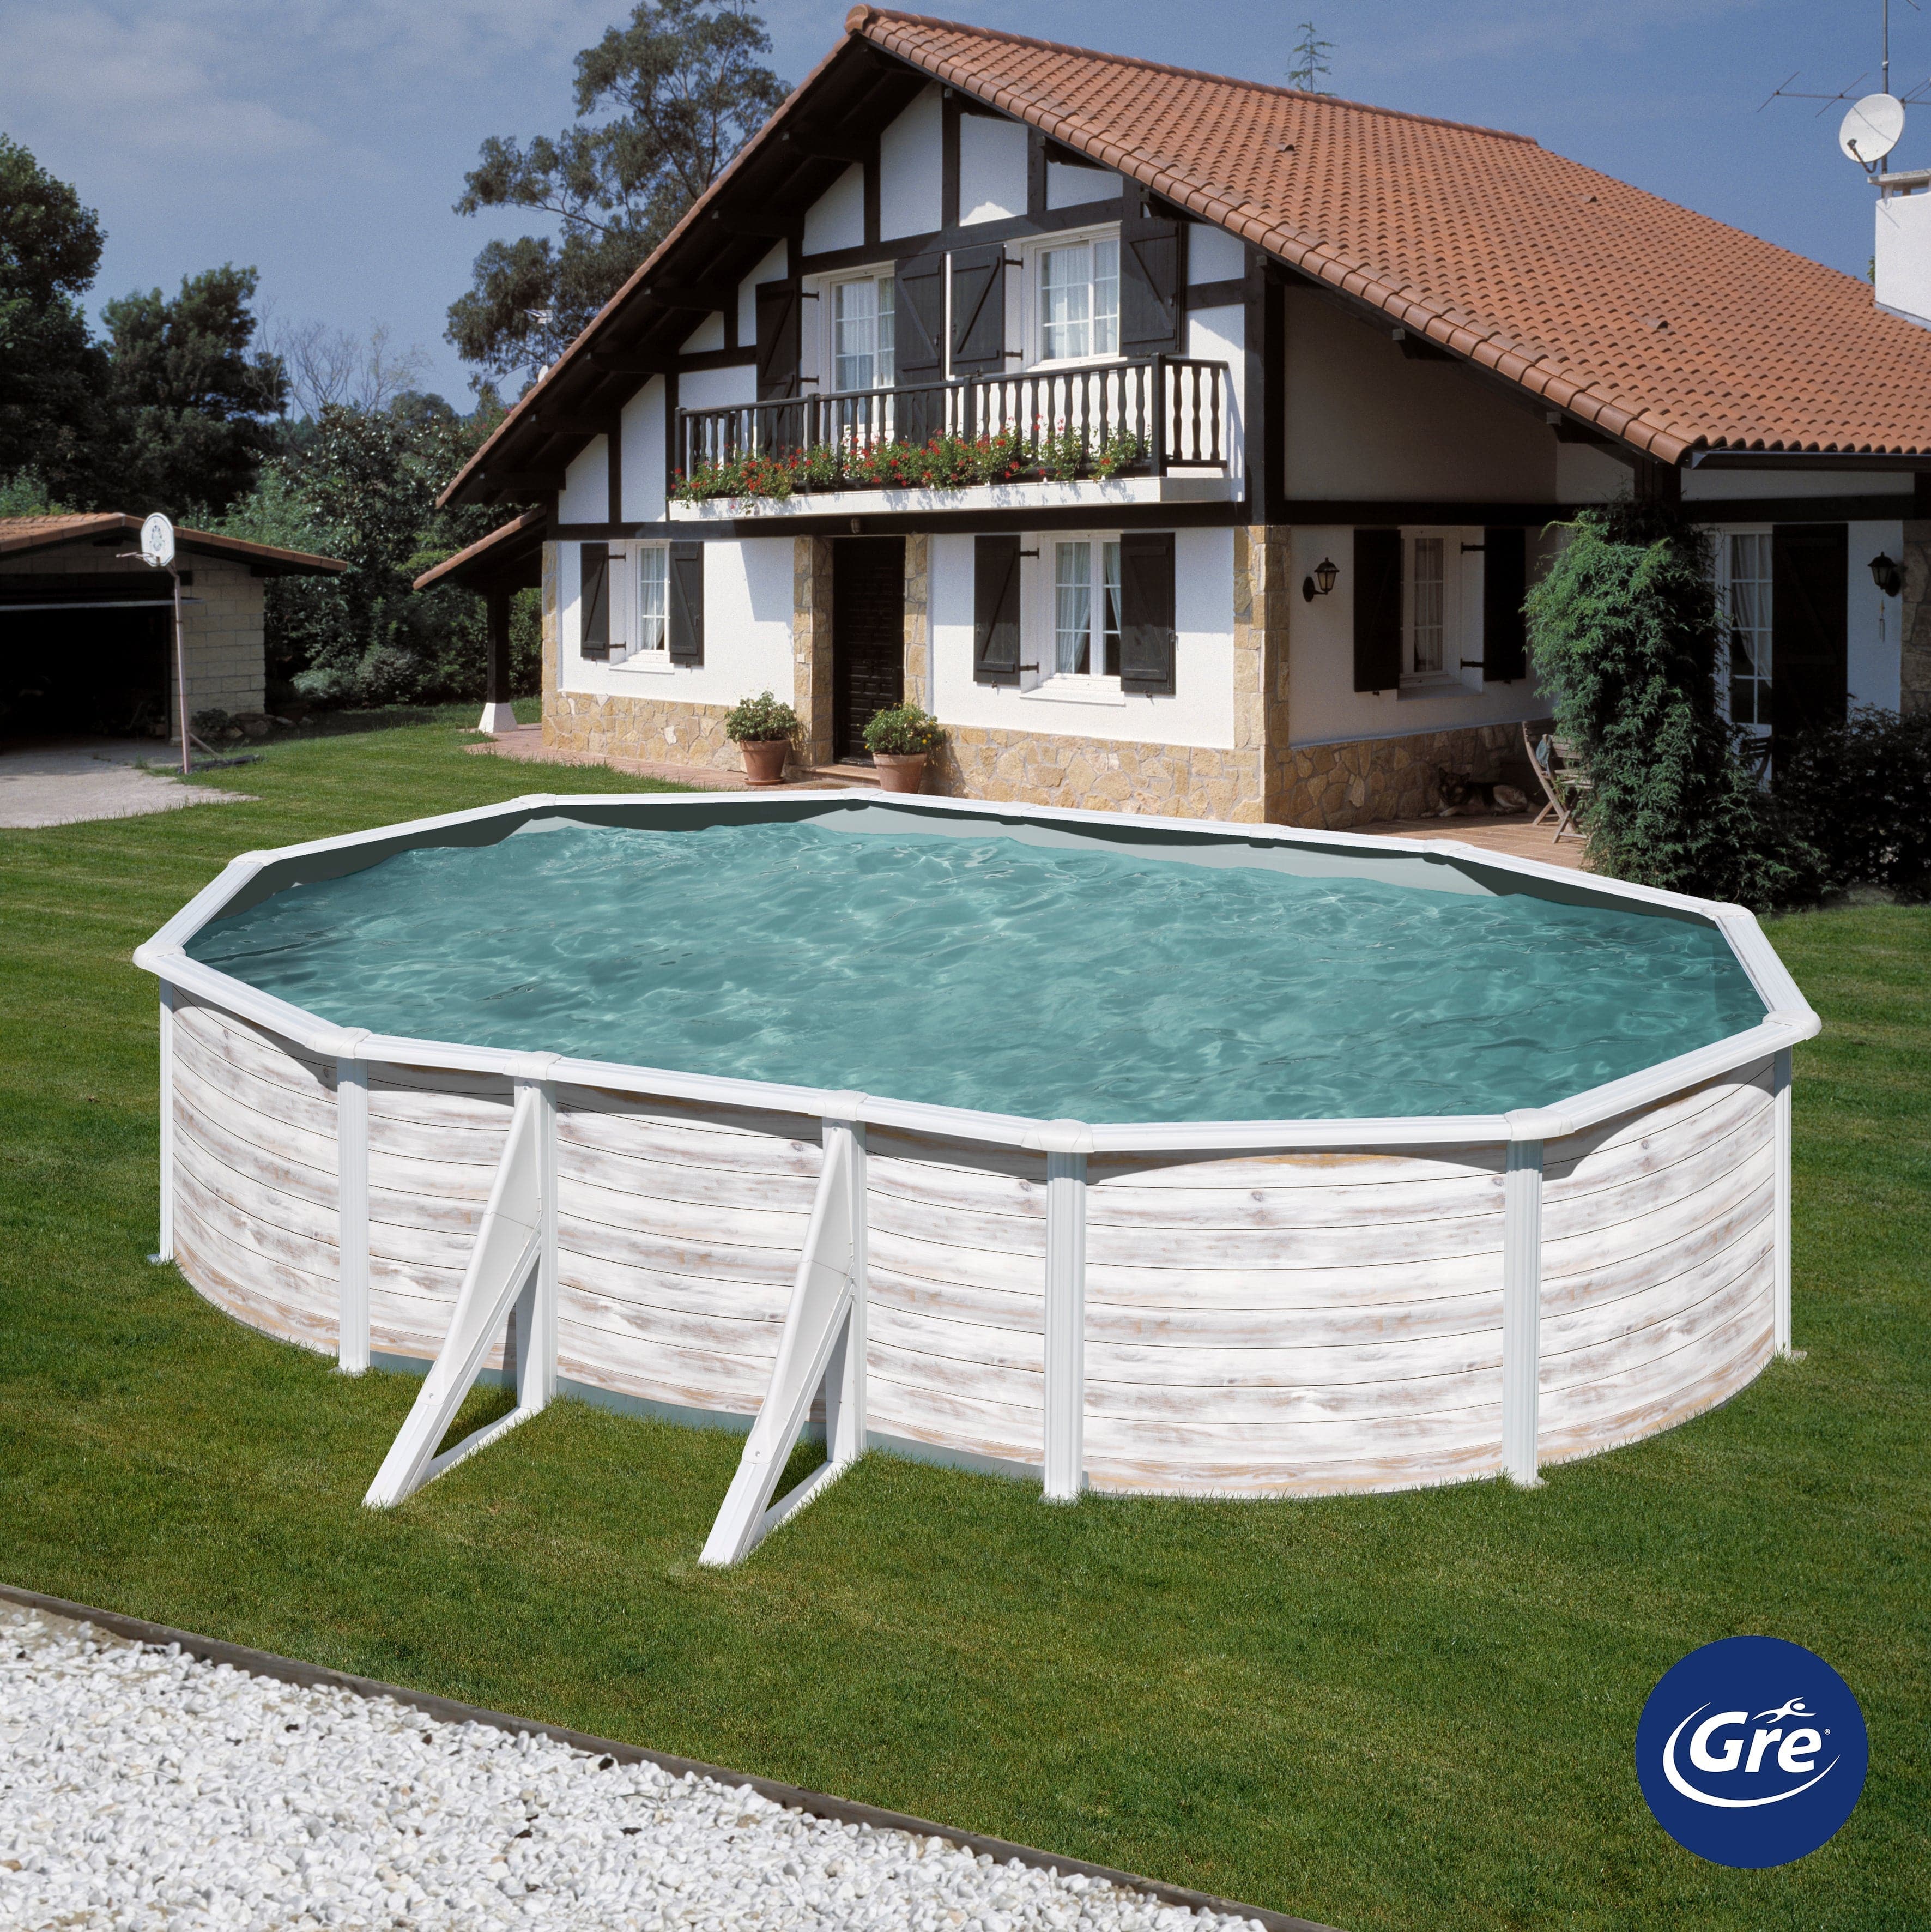 OVAL STEEL SWIMMING POOL NORDIC DECORATION 610X375 H 120 WITH SAND FILTER